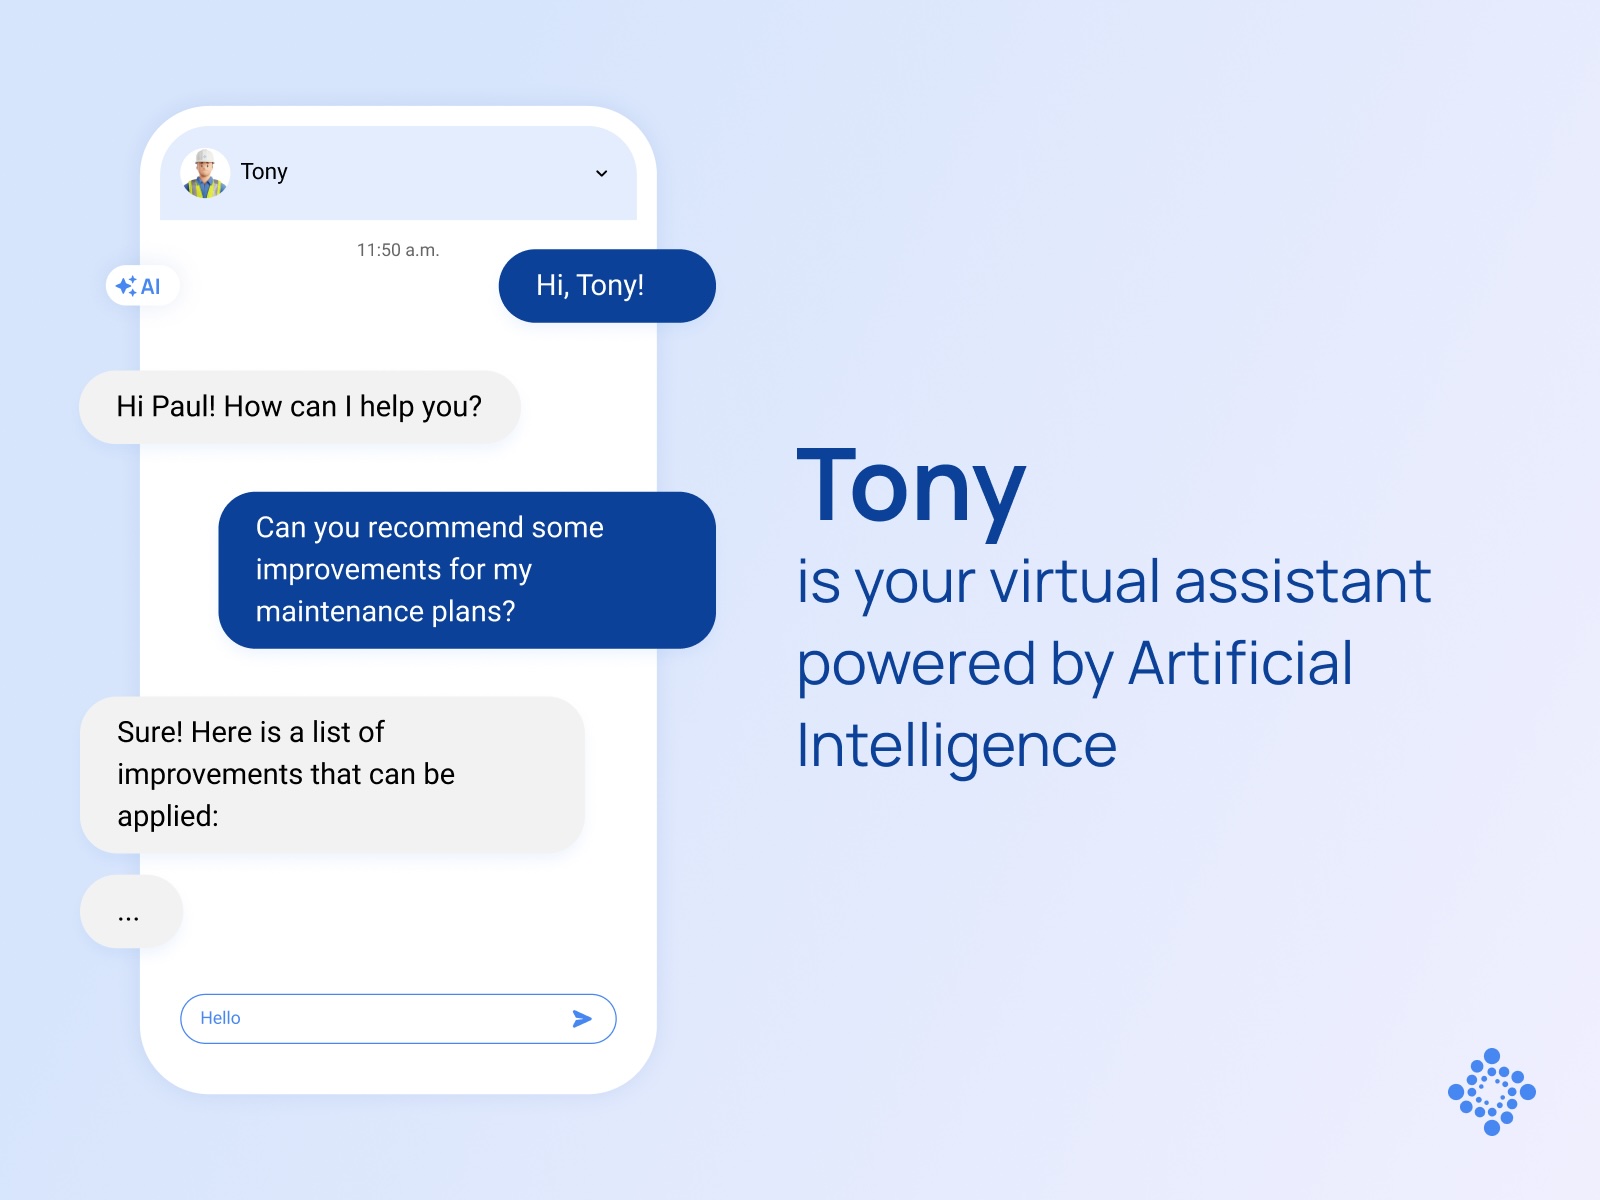 AI assistant. Tony is your virtual assistant powered by Artificial Intelligence.